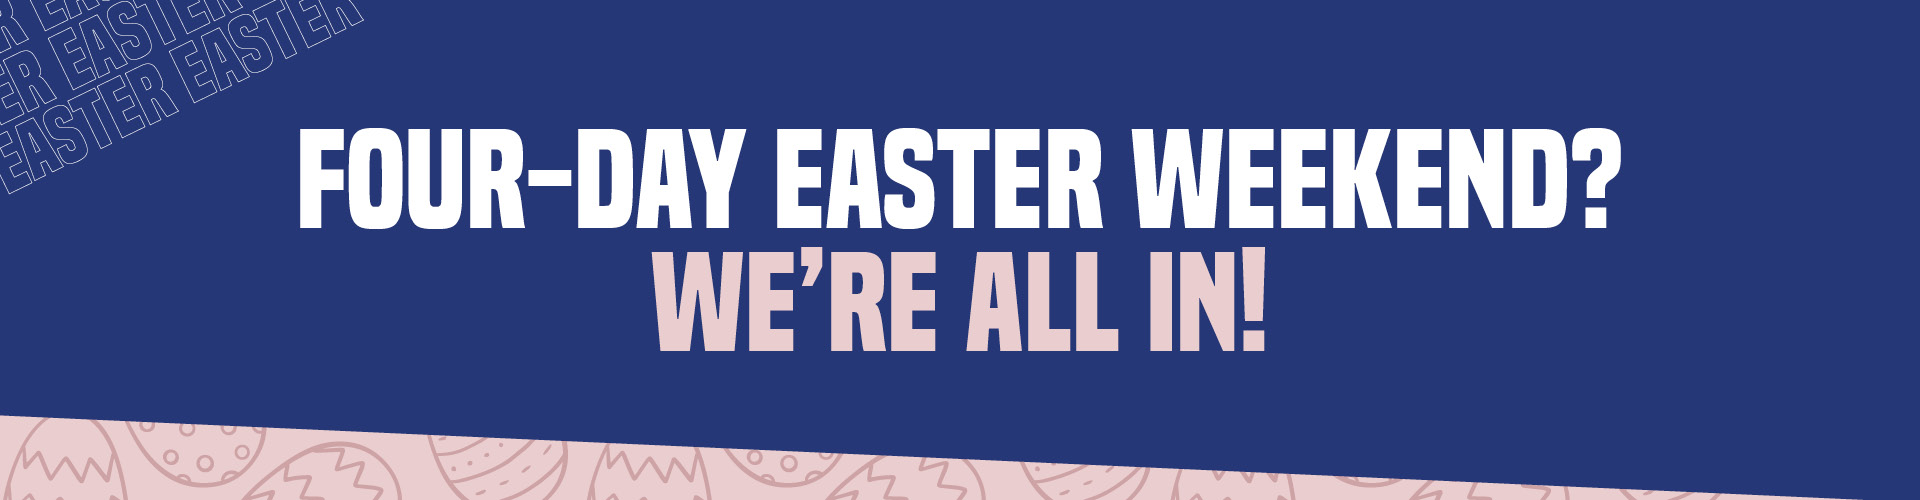 Four-day Easter weekend? We're all in!